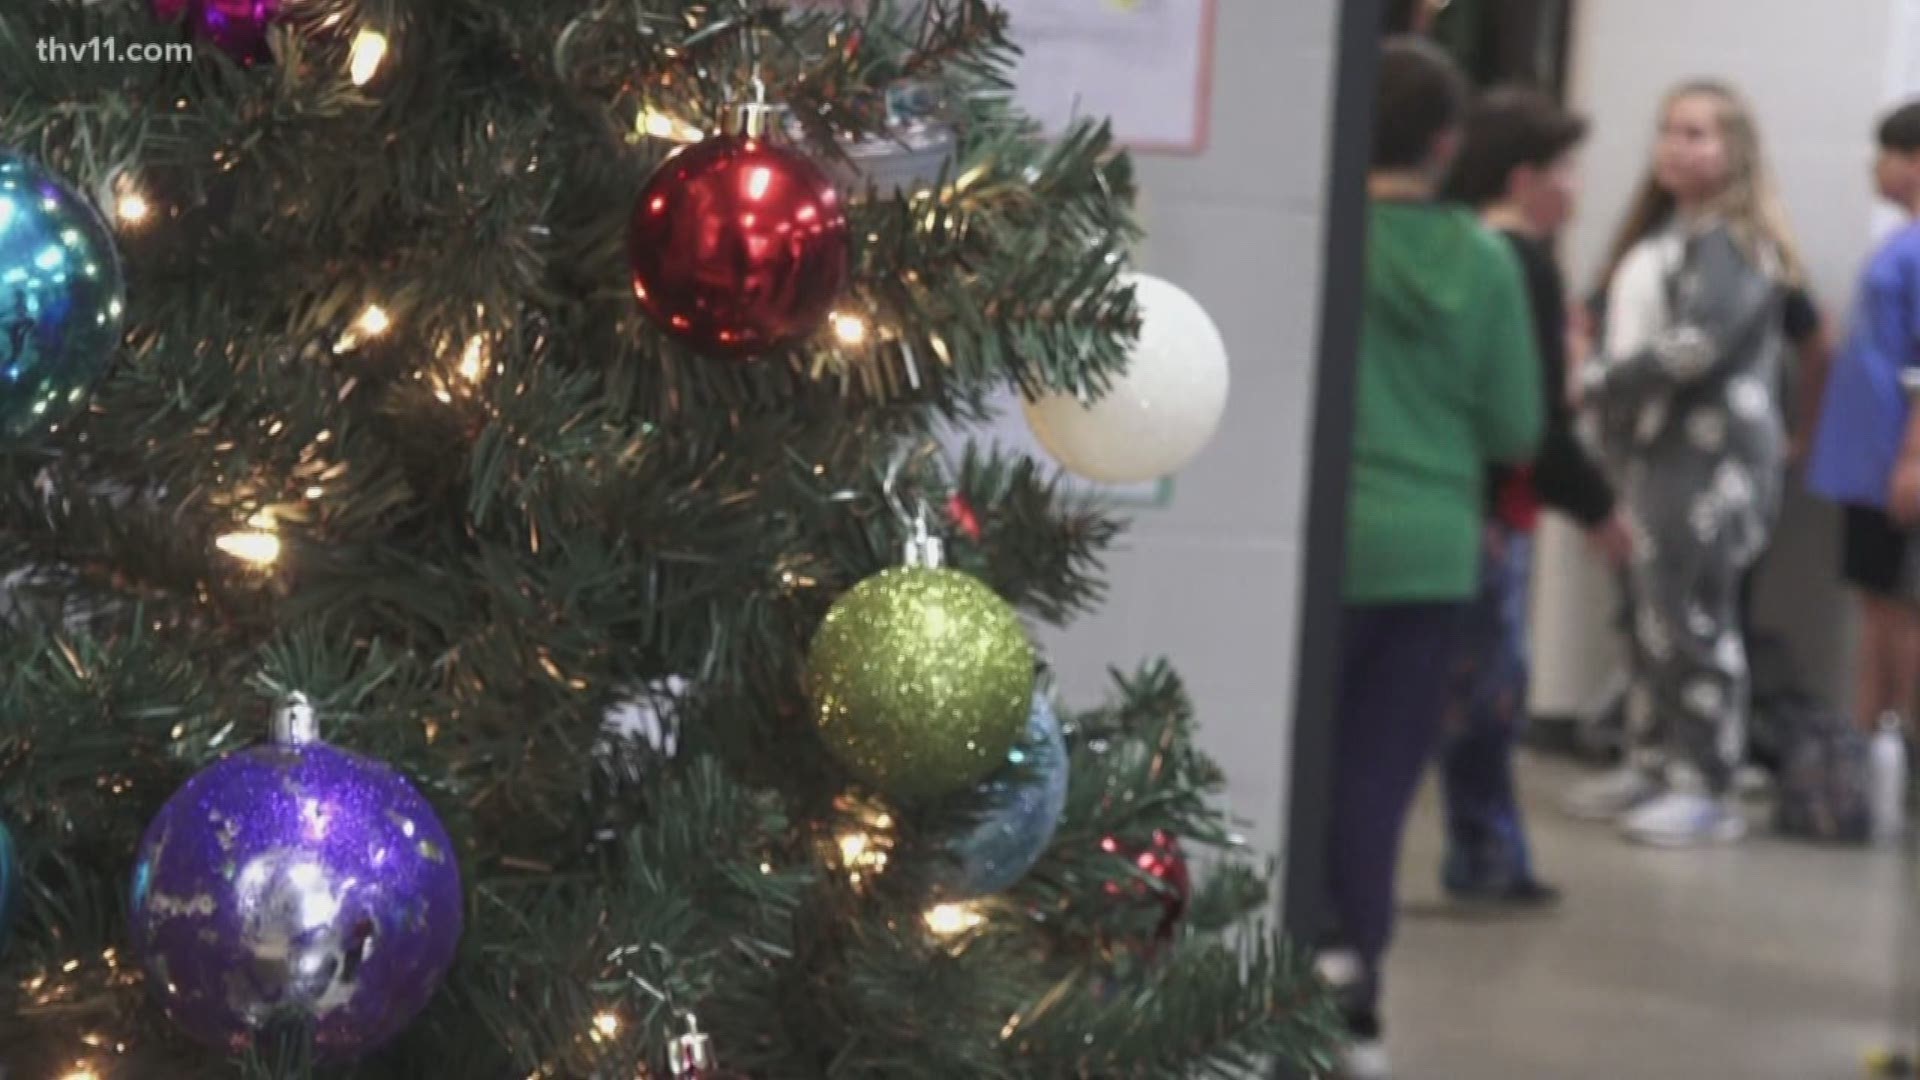 Students at Bauxite's Pine Haven Elementary have raised money so their classmates in need will have a Christmas tree this year.